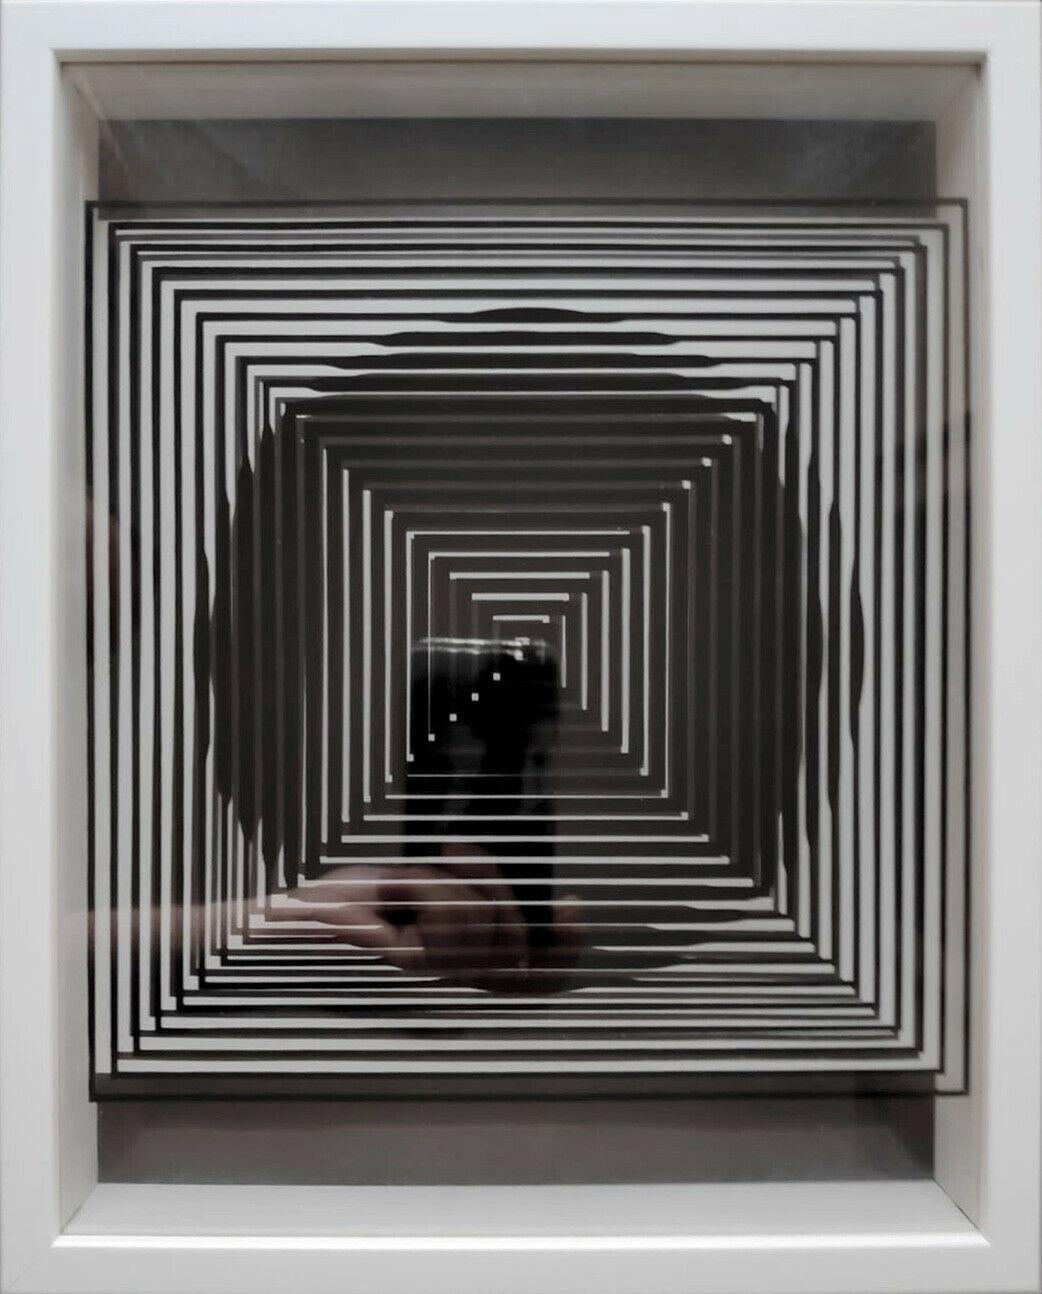 Victor Vasarely
Kinetics 1
double screen print on rhodoid and cardboard
editions of the griffon
neuchatel (switzerland)
1st edition . 1973
white wood frame
perfect condition
very nice kinetic effect by superimposing the 2 supports
Frame dimensions: